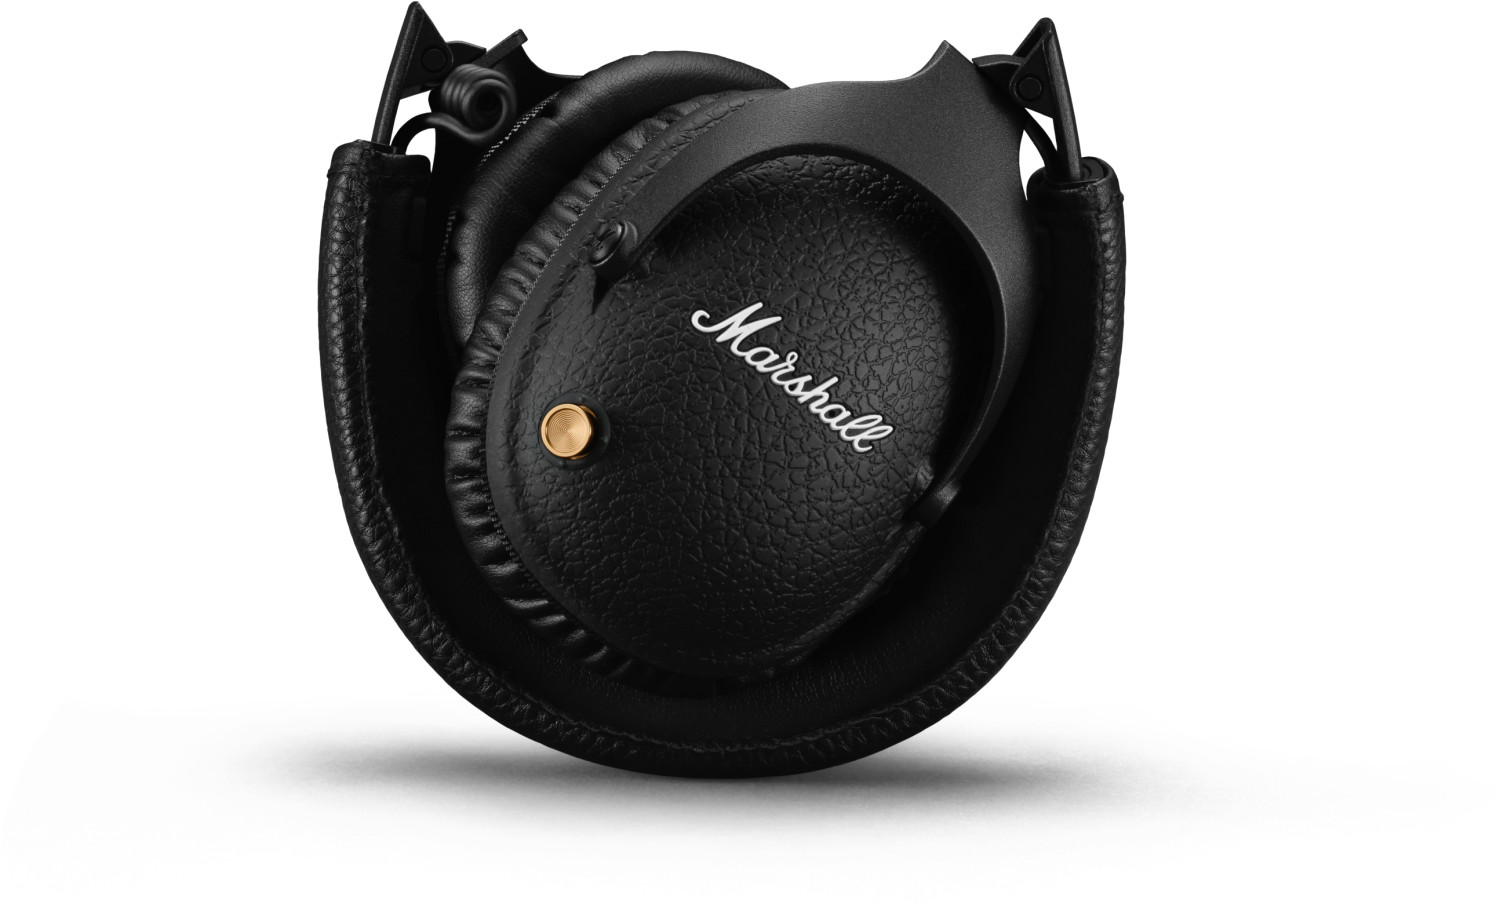 Soldes d'hiver : le casque Marshall Monitor Bluetooth à 129,99 euros